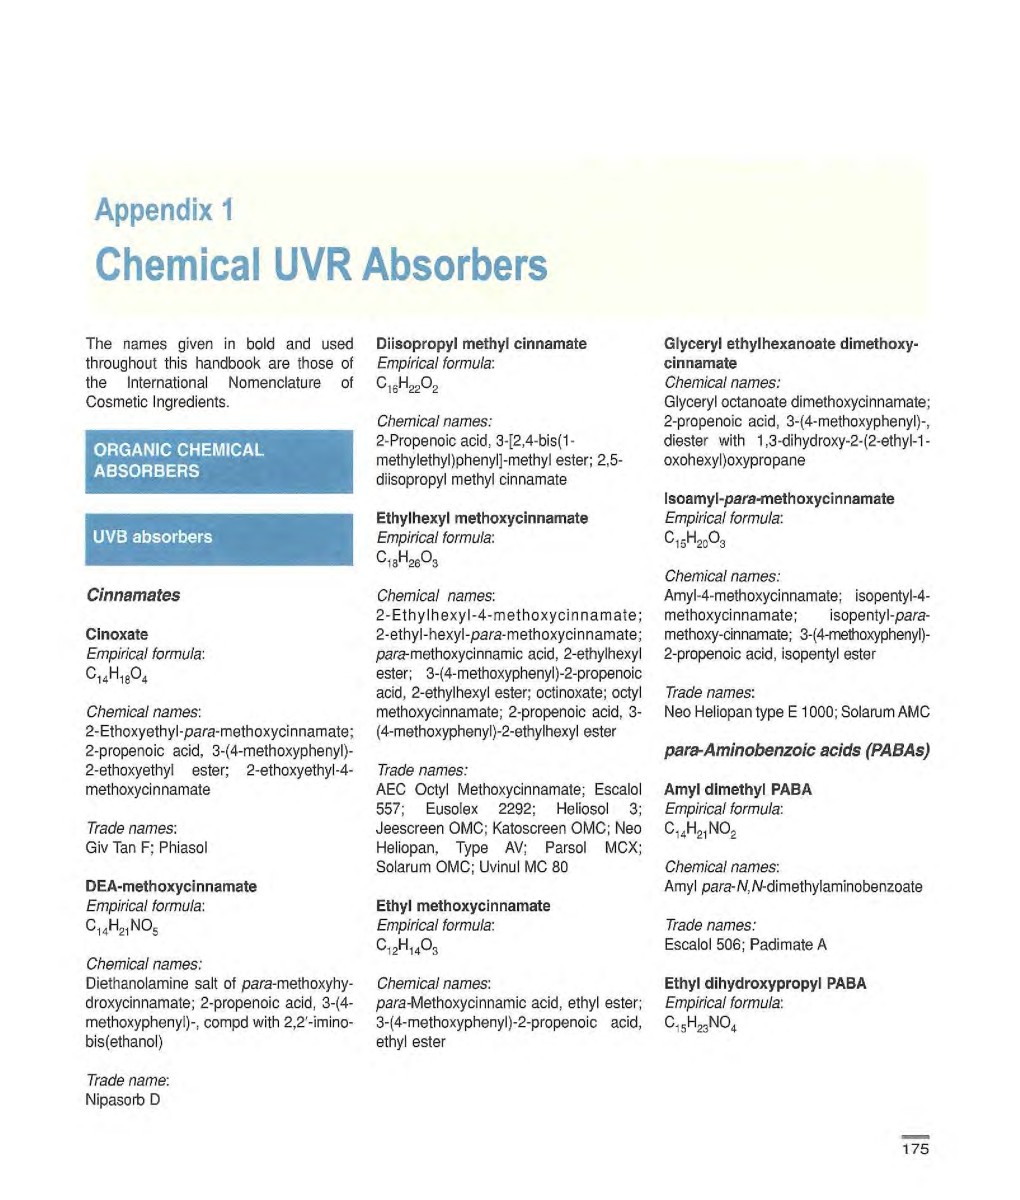 Chemical UVR Absorbers